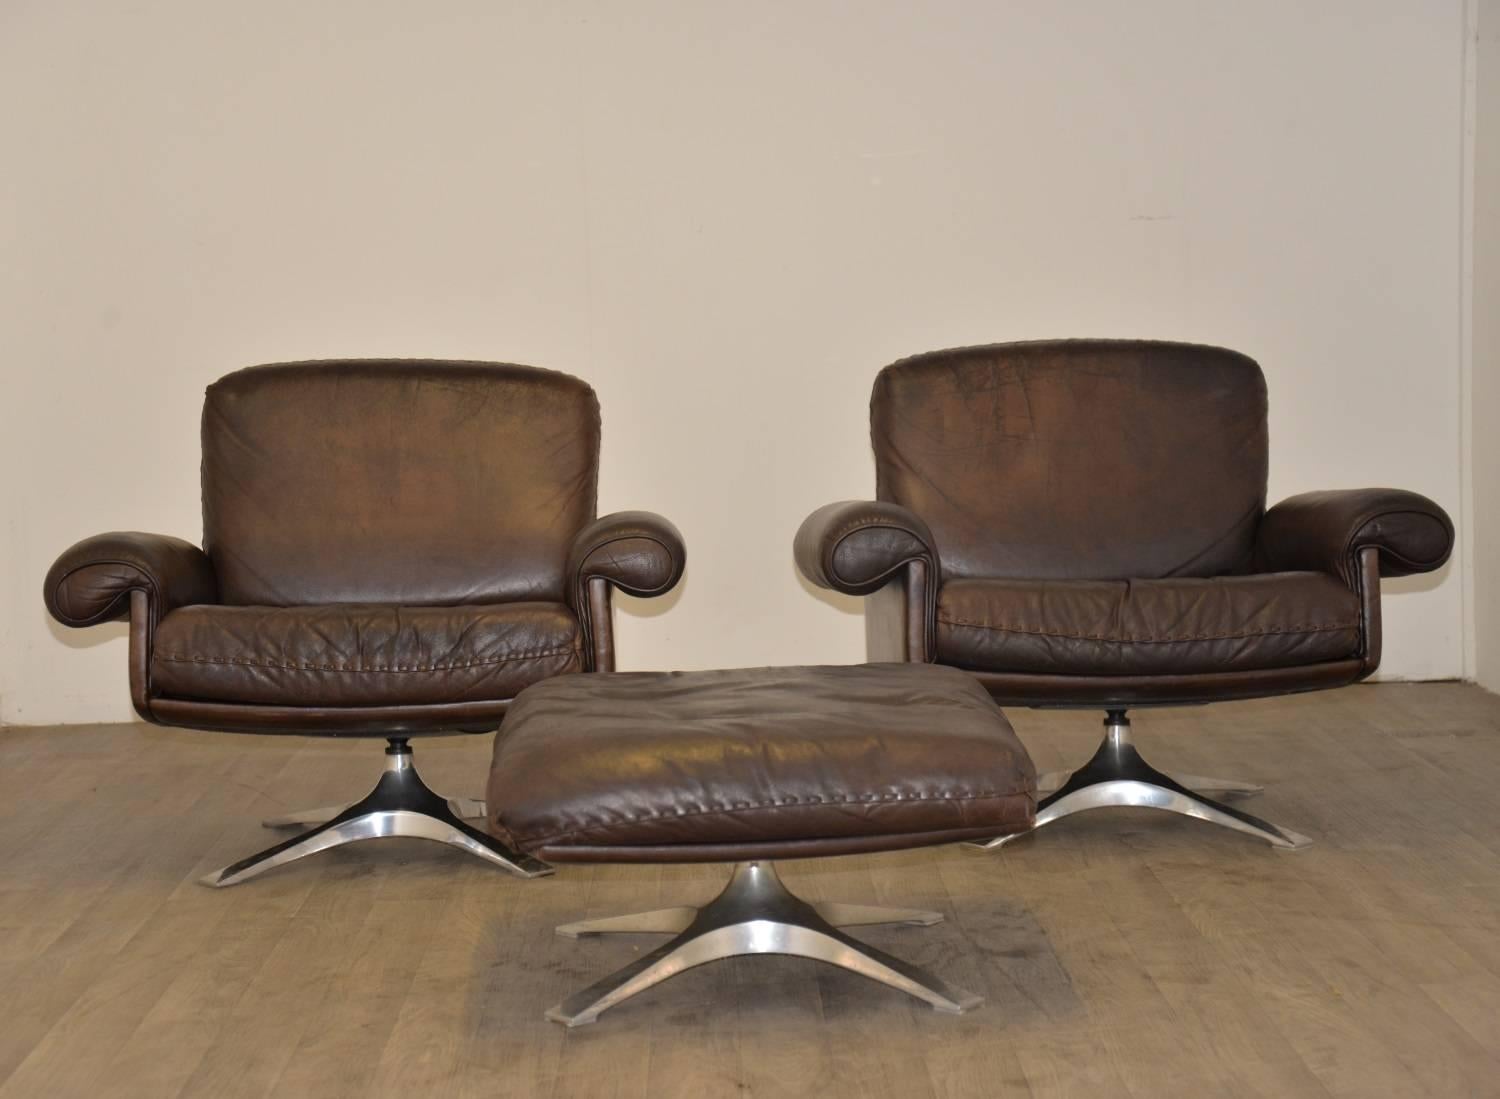 Discounted airfreight for our US Continent customers ( from 2 weeks door to door)

The Cambridge Chair Company brings to you a pair of highly desirable retro De Sede DS-31 swivel lounge club armchairs and ottoman in beautiful soft aniline leather